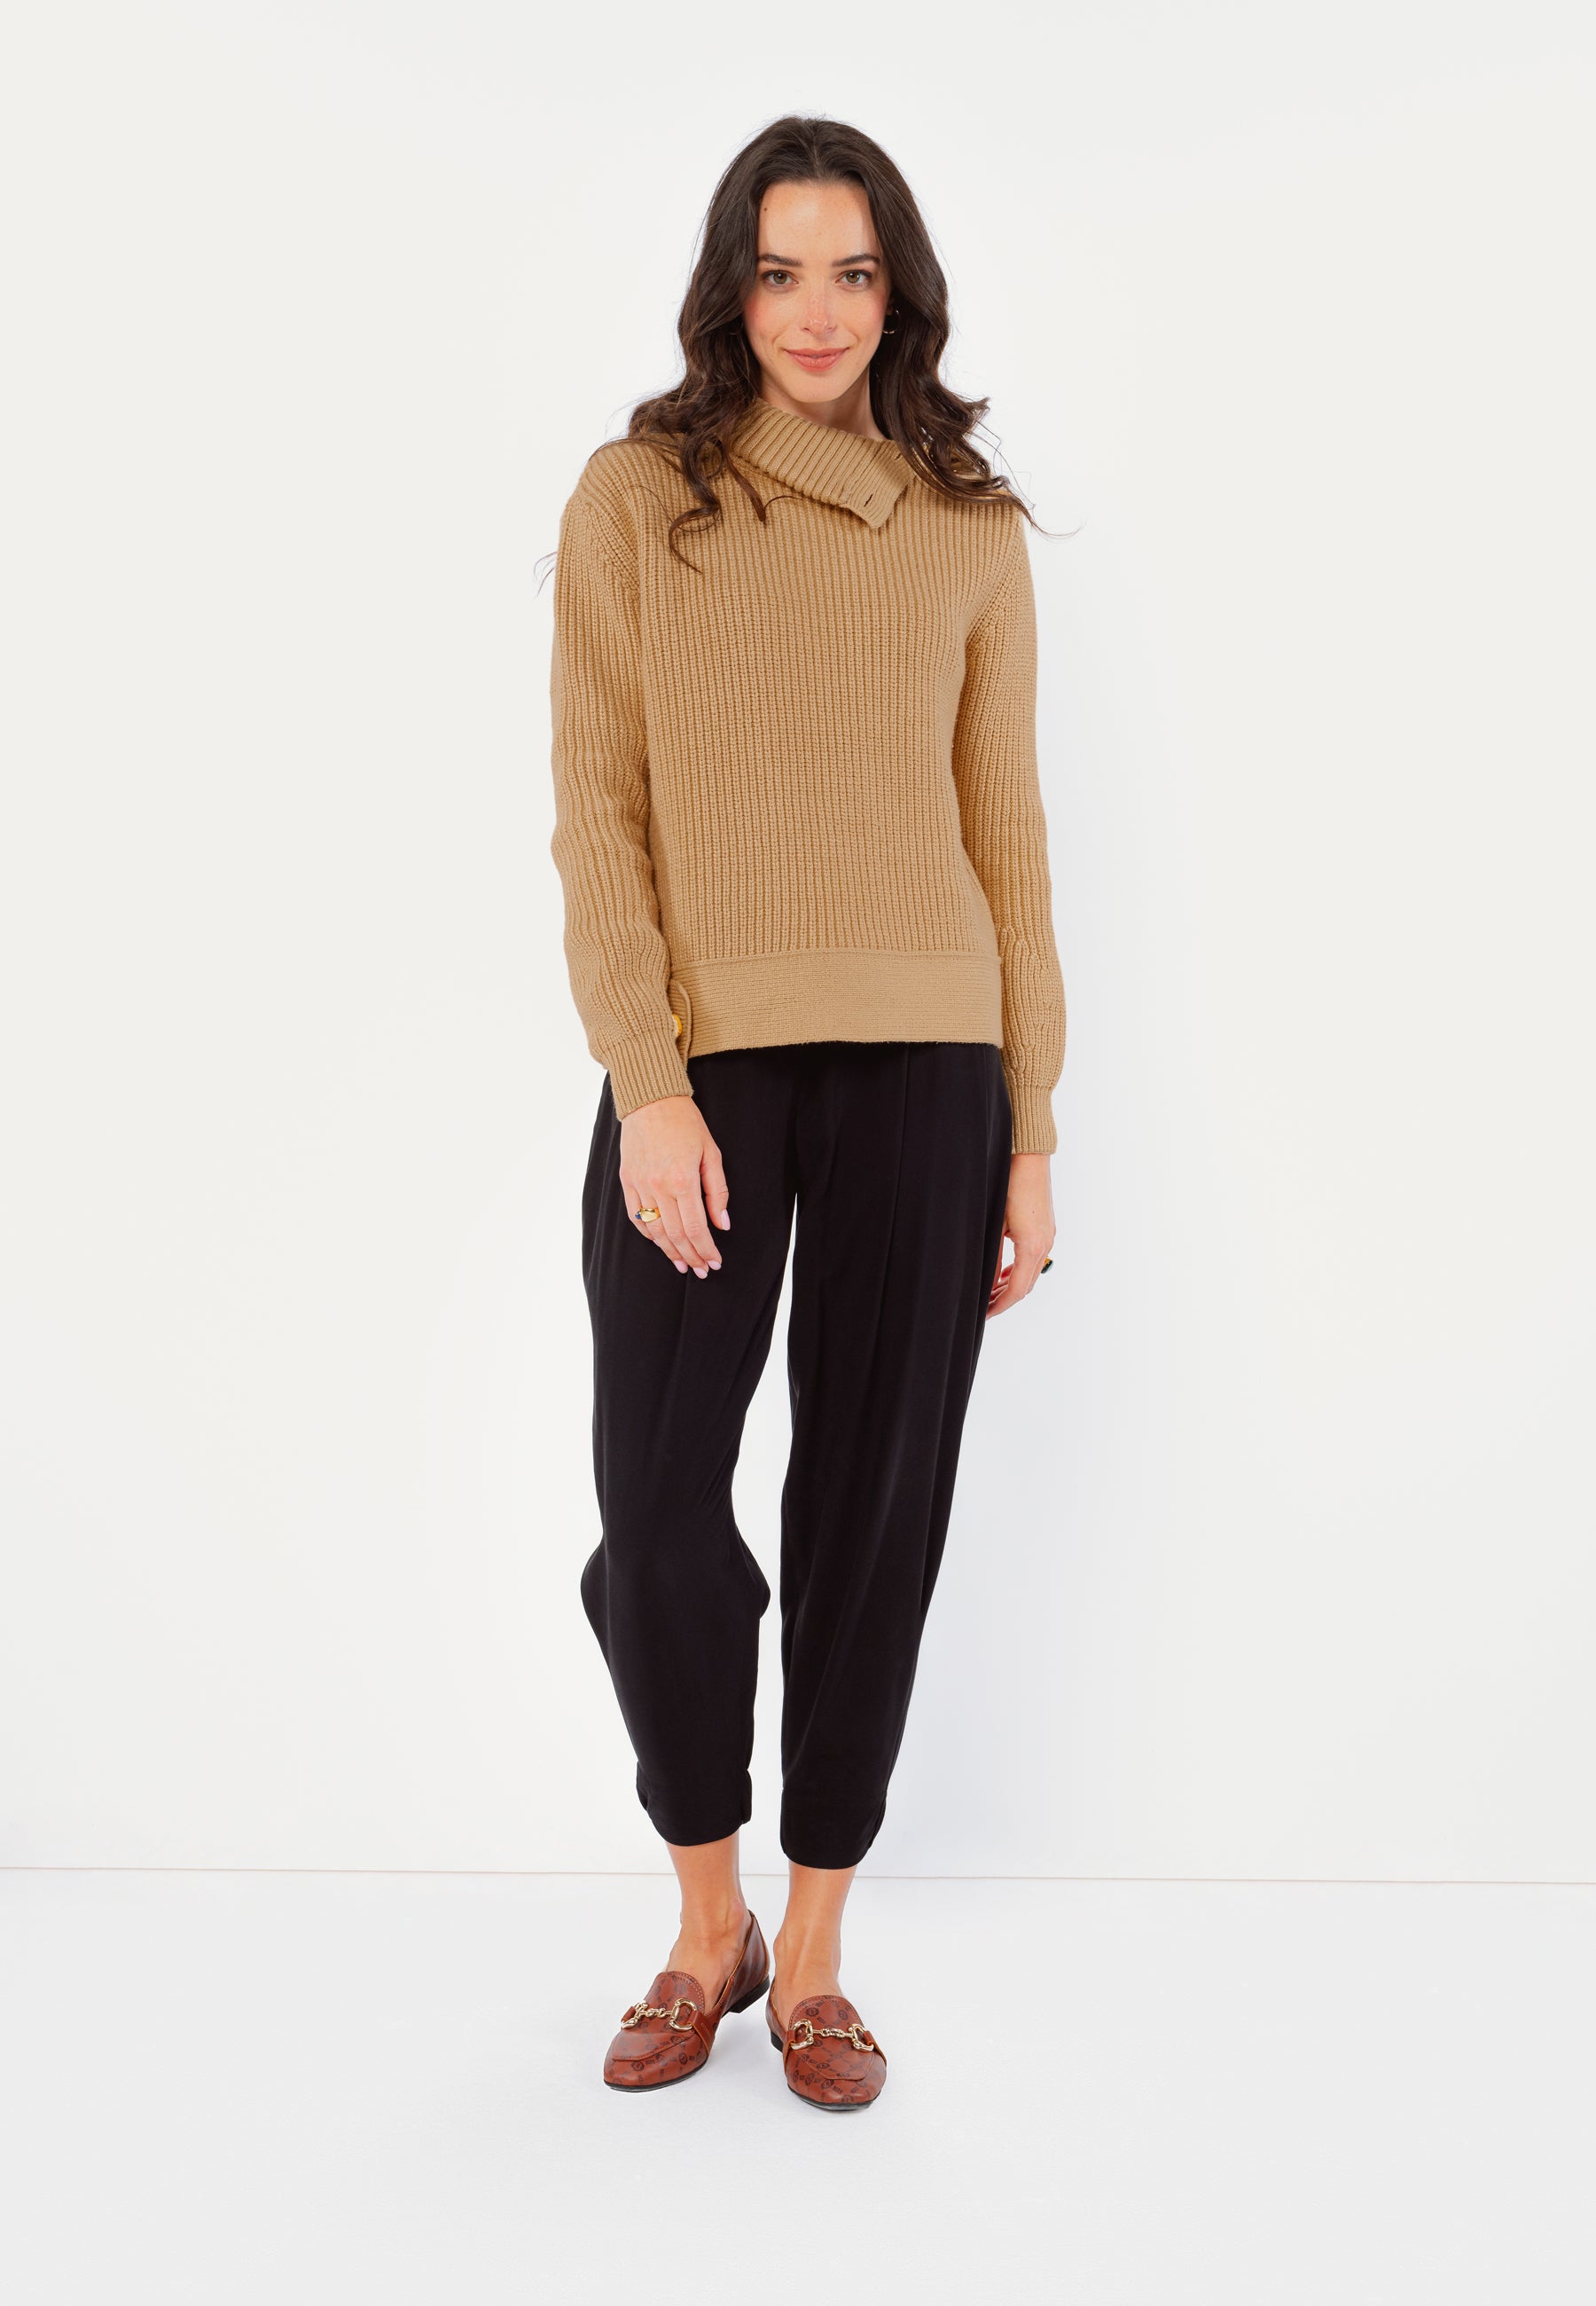 BLANI beige turtleneck with decorative buttons